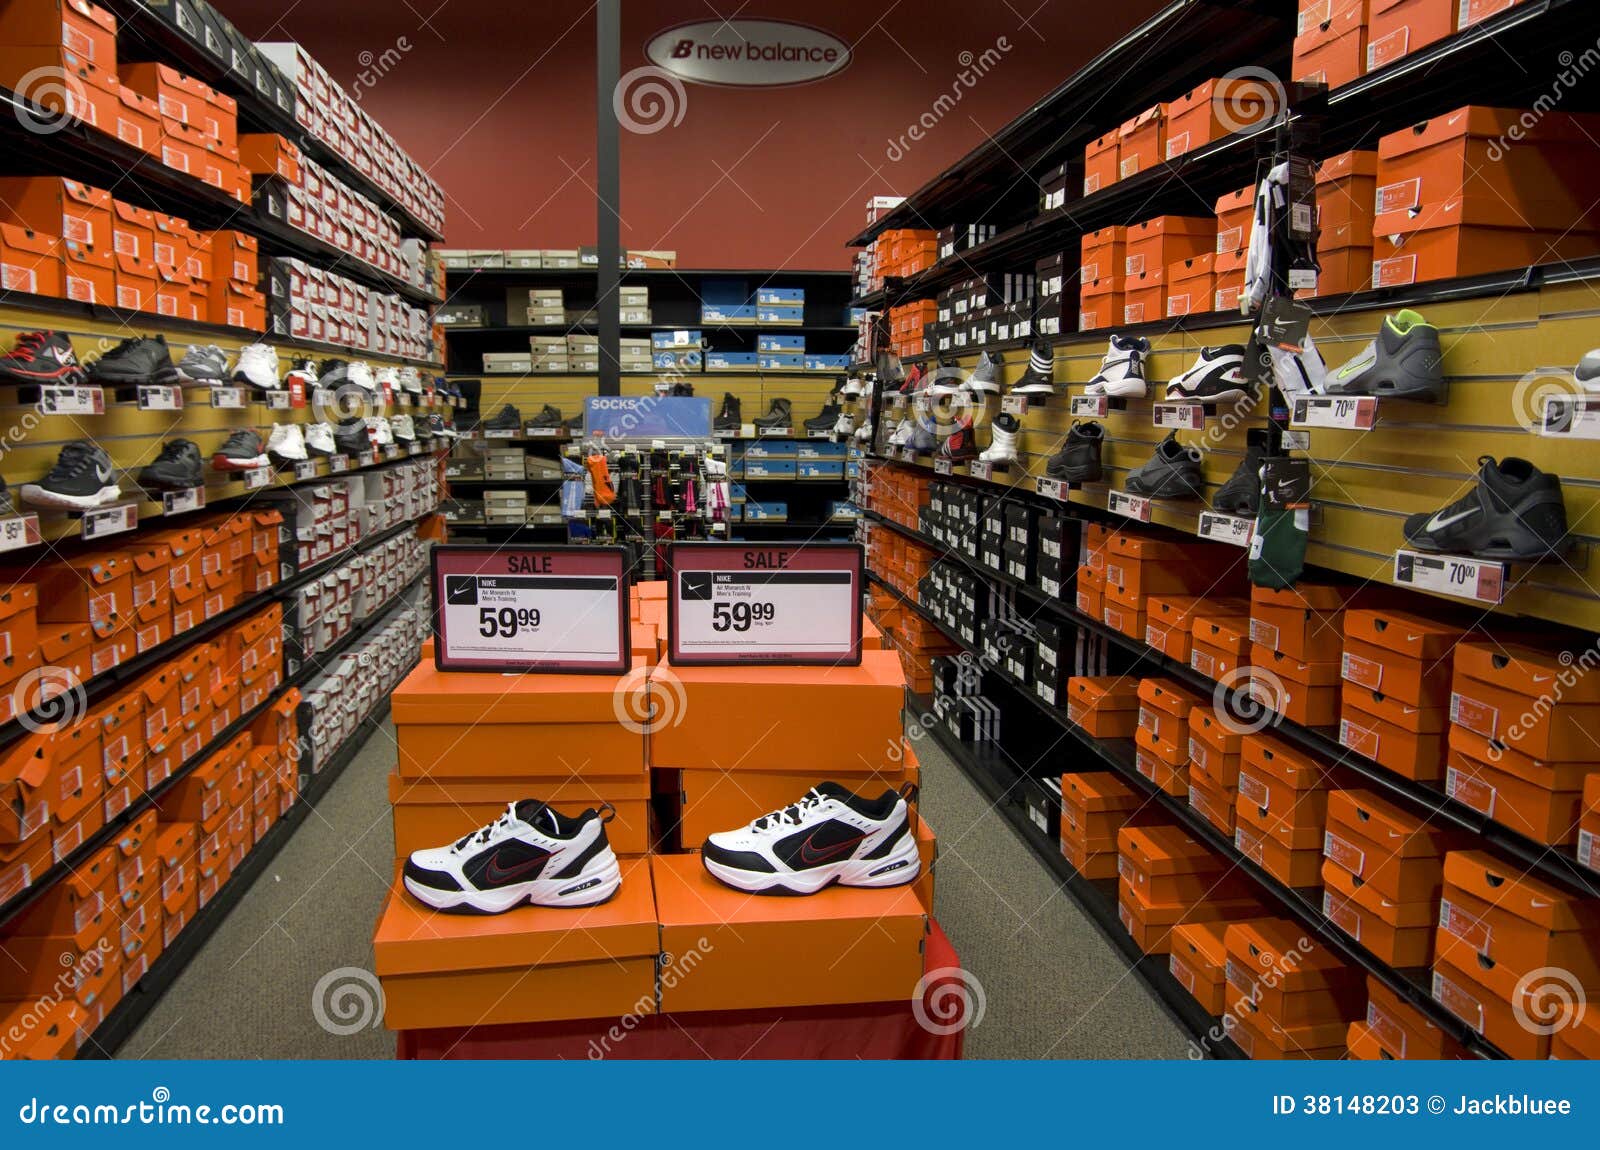 sports authority shoes nike